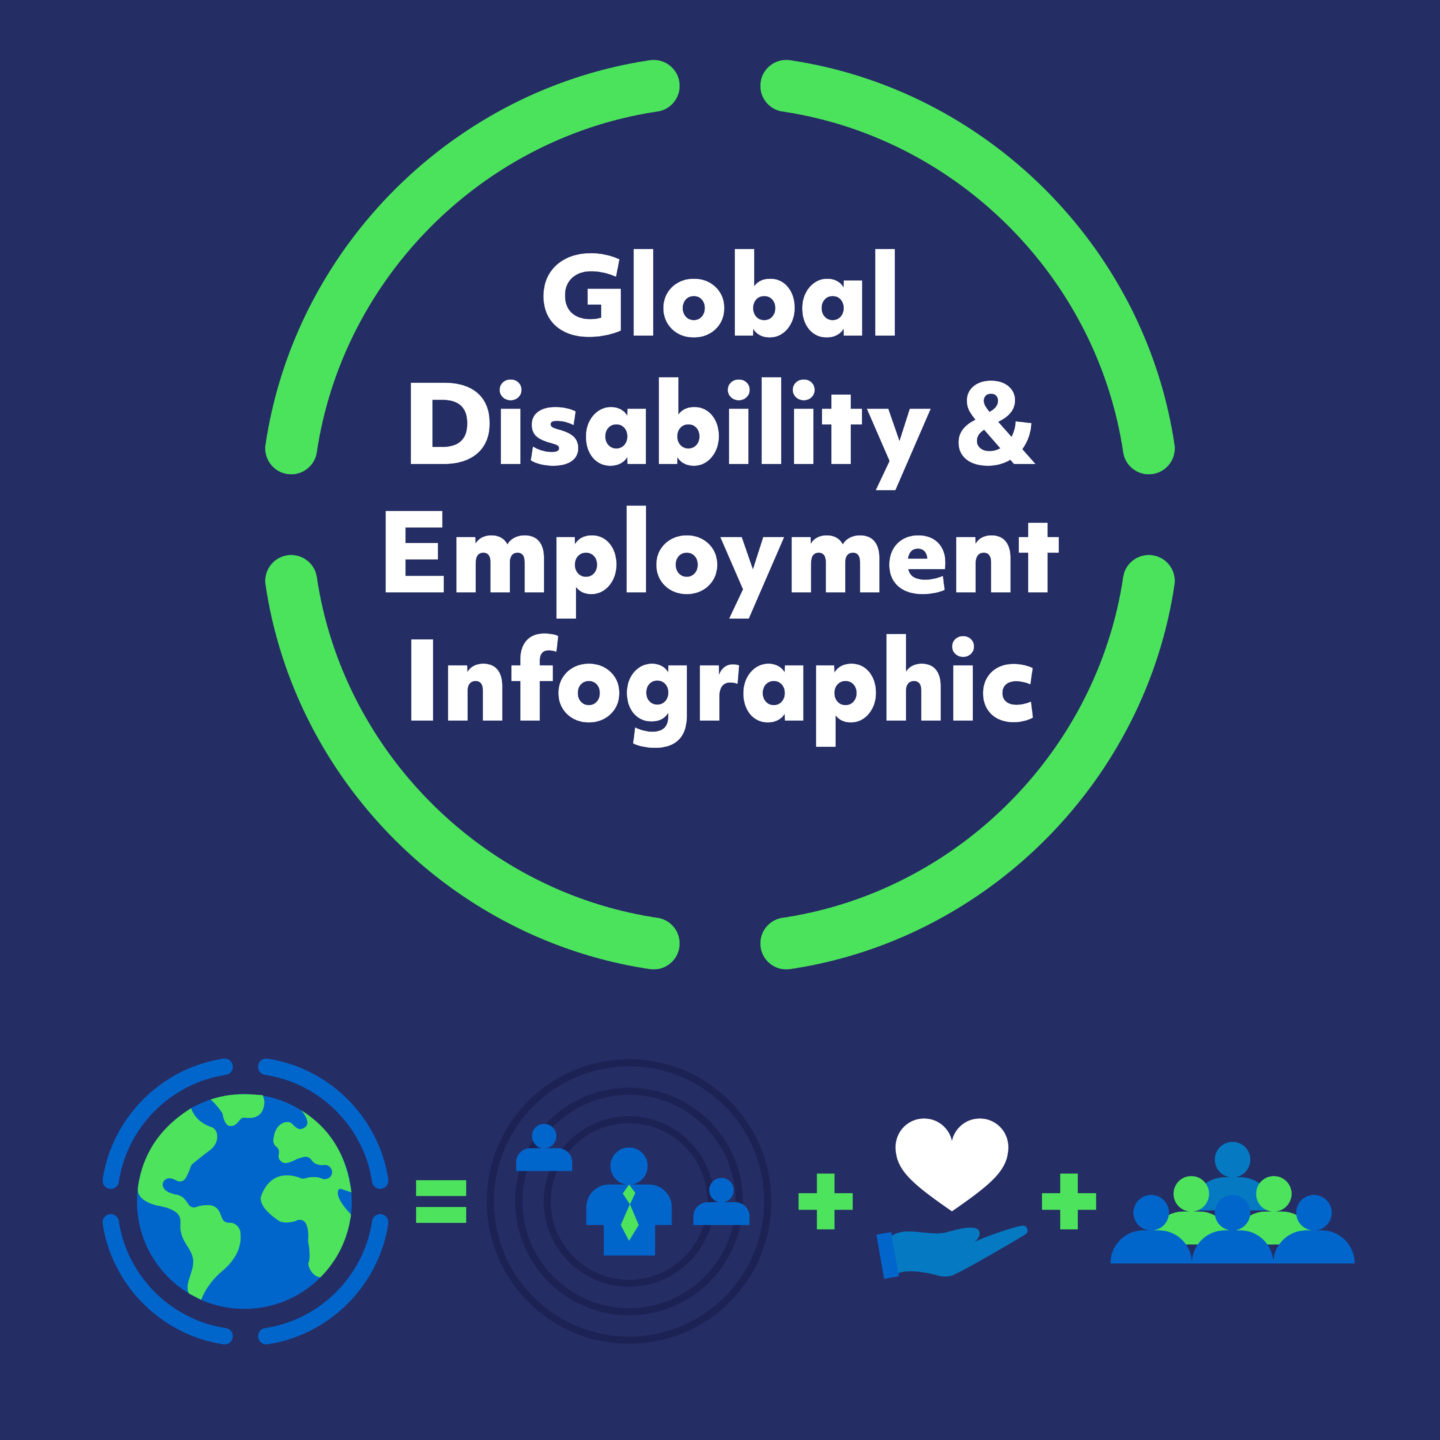 Global Disability & Employment Infographic in white text inside of a neon green stenciled circle. At the bottom are global, ERG, and group icons.